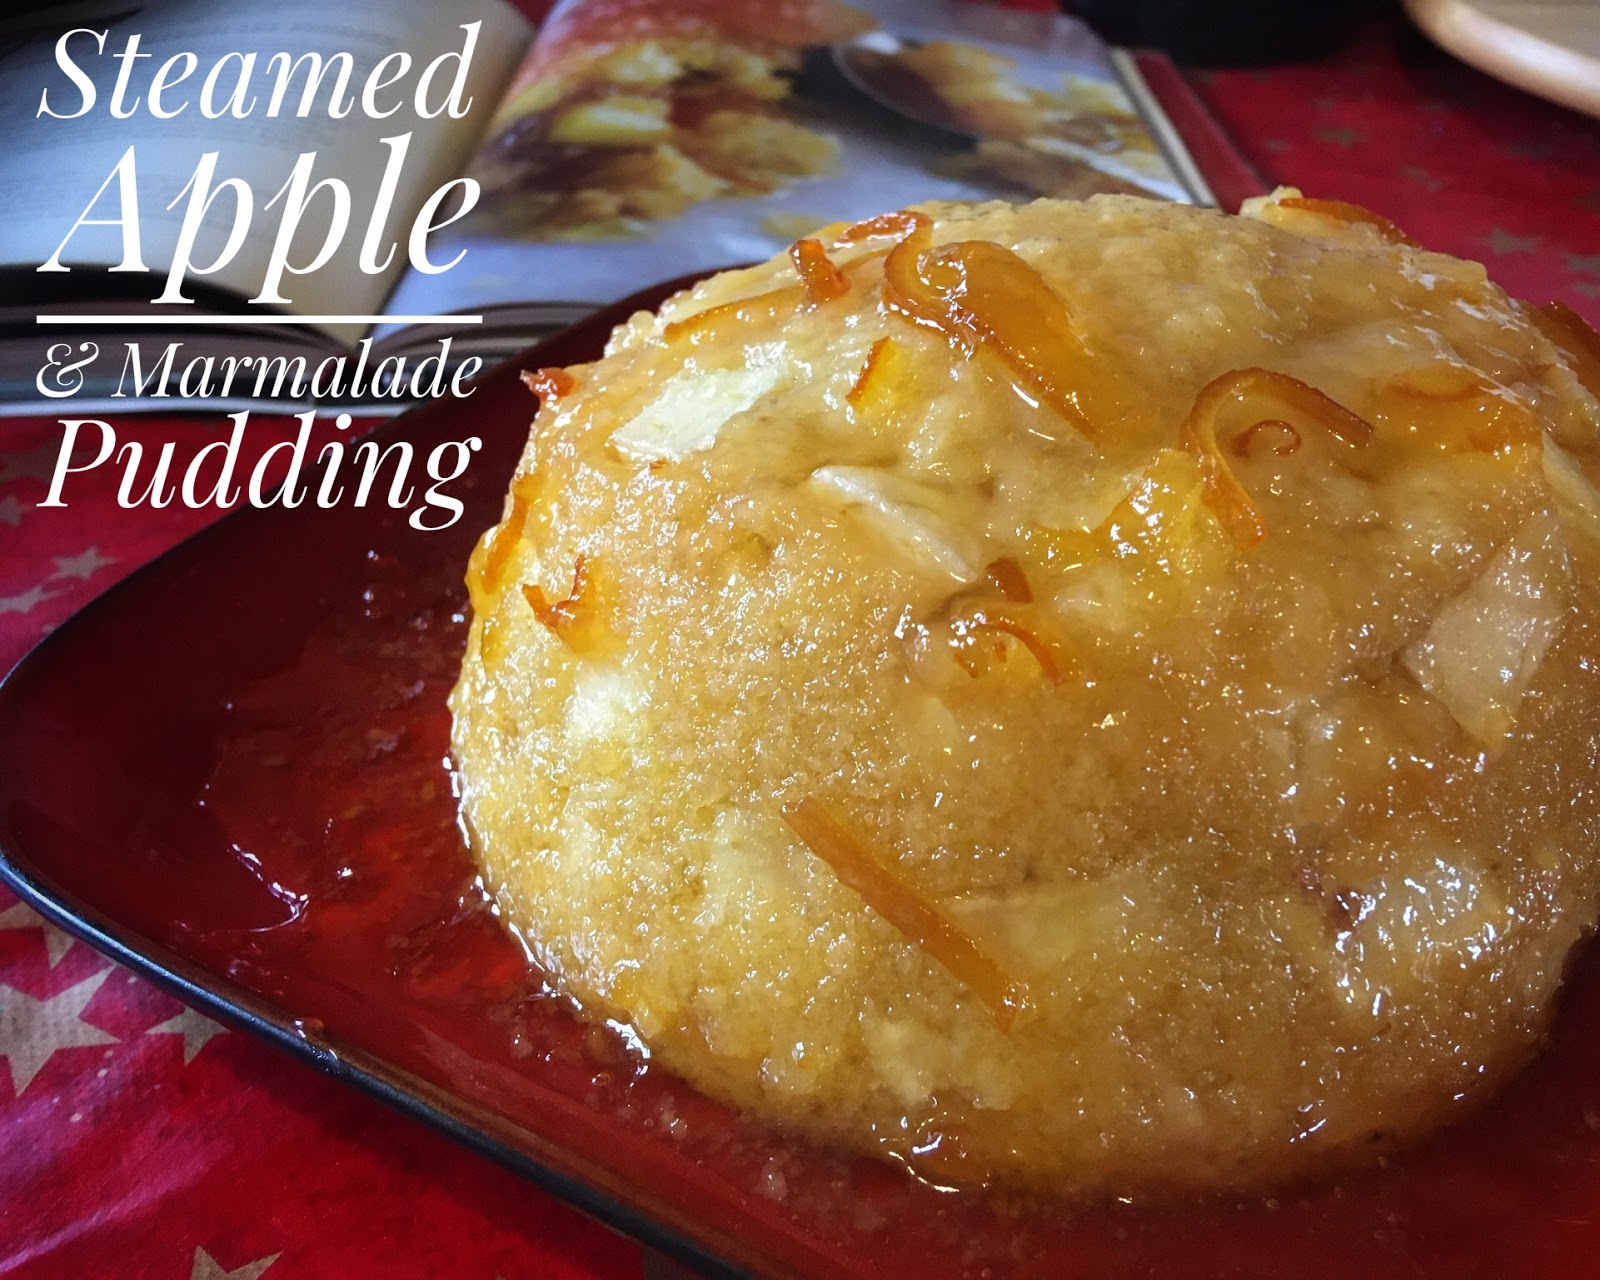 Steamed Apple & Marmalade Pudding